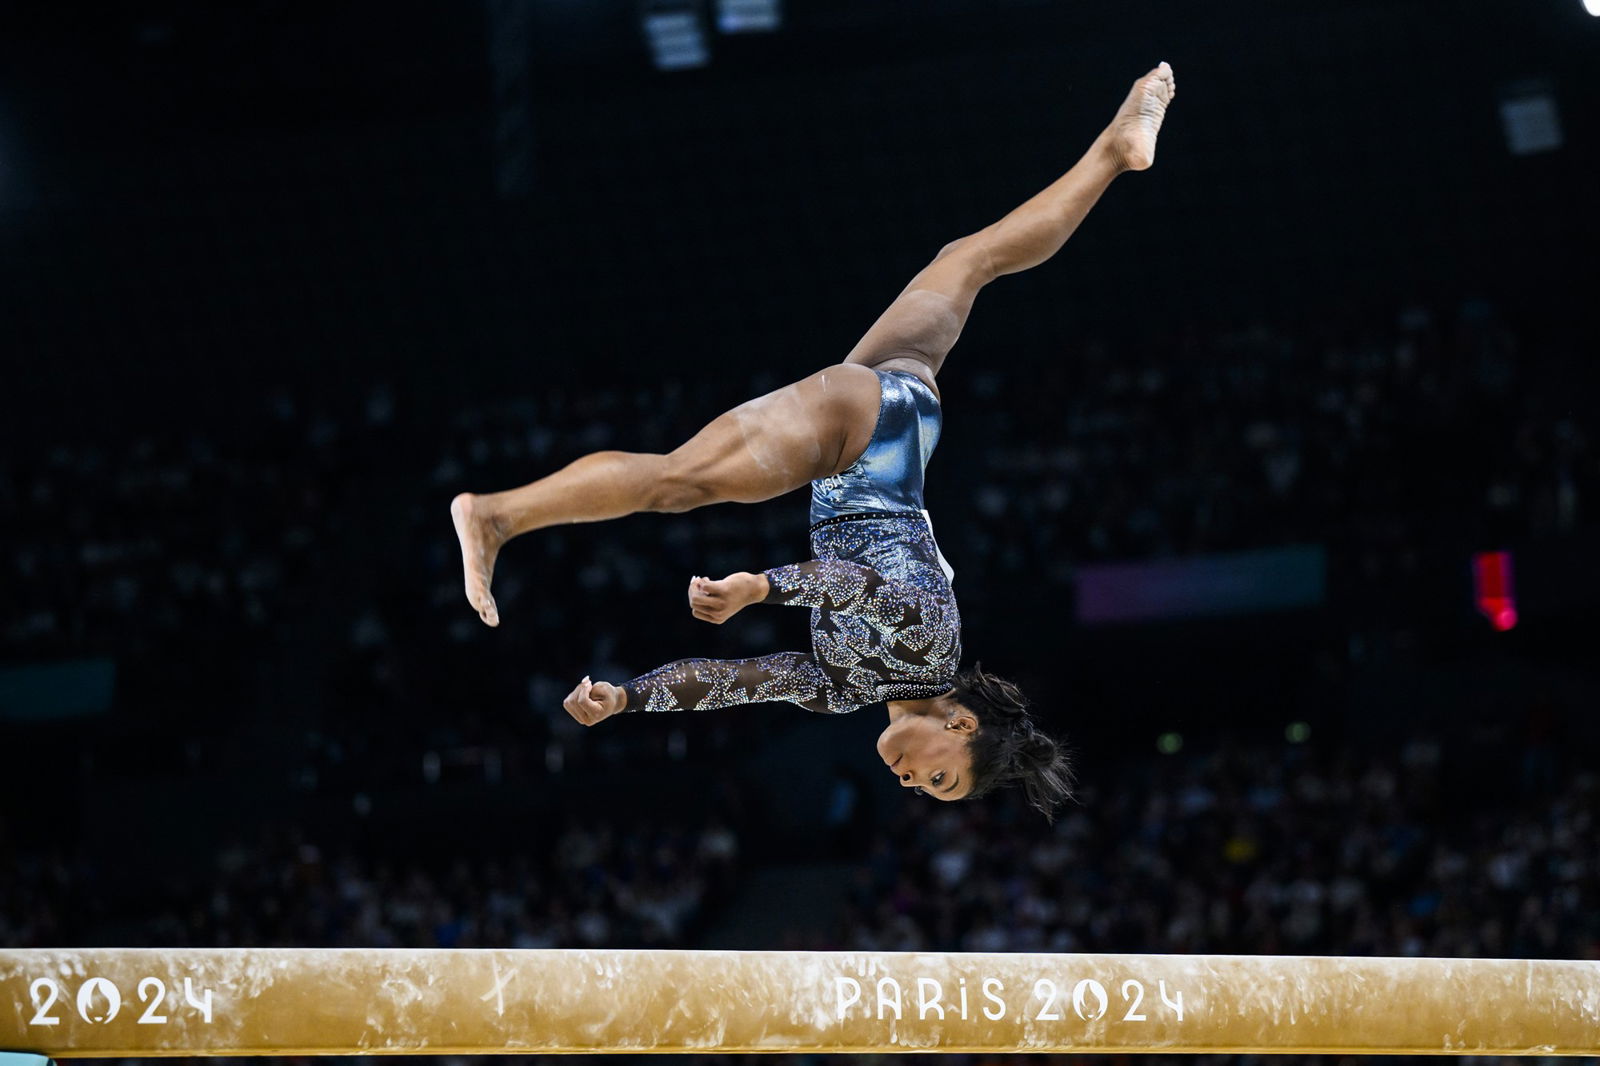 Simone Biles upside down with her legs split as she competes on the balance beam.